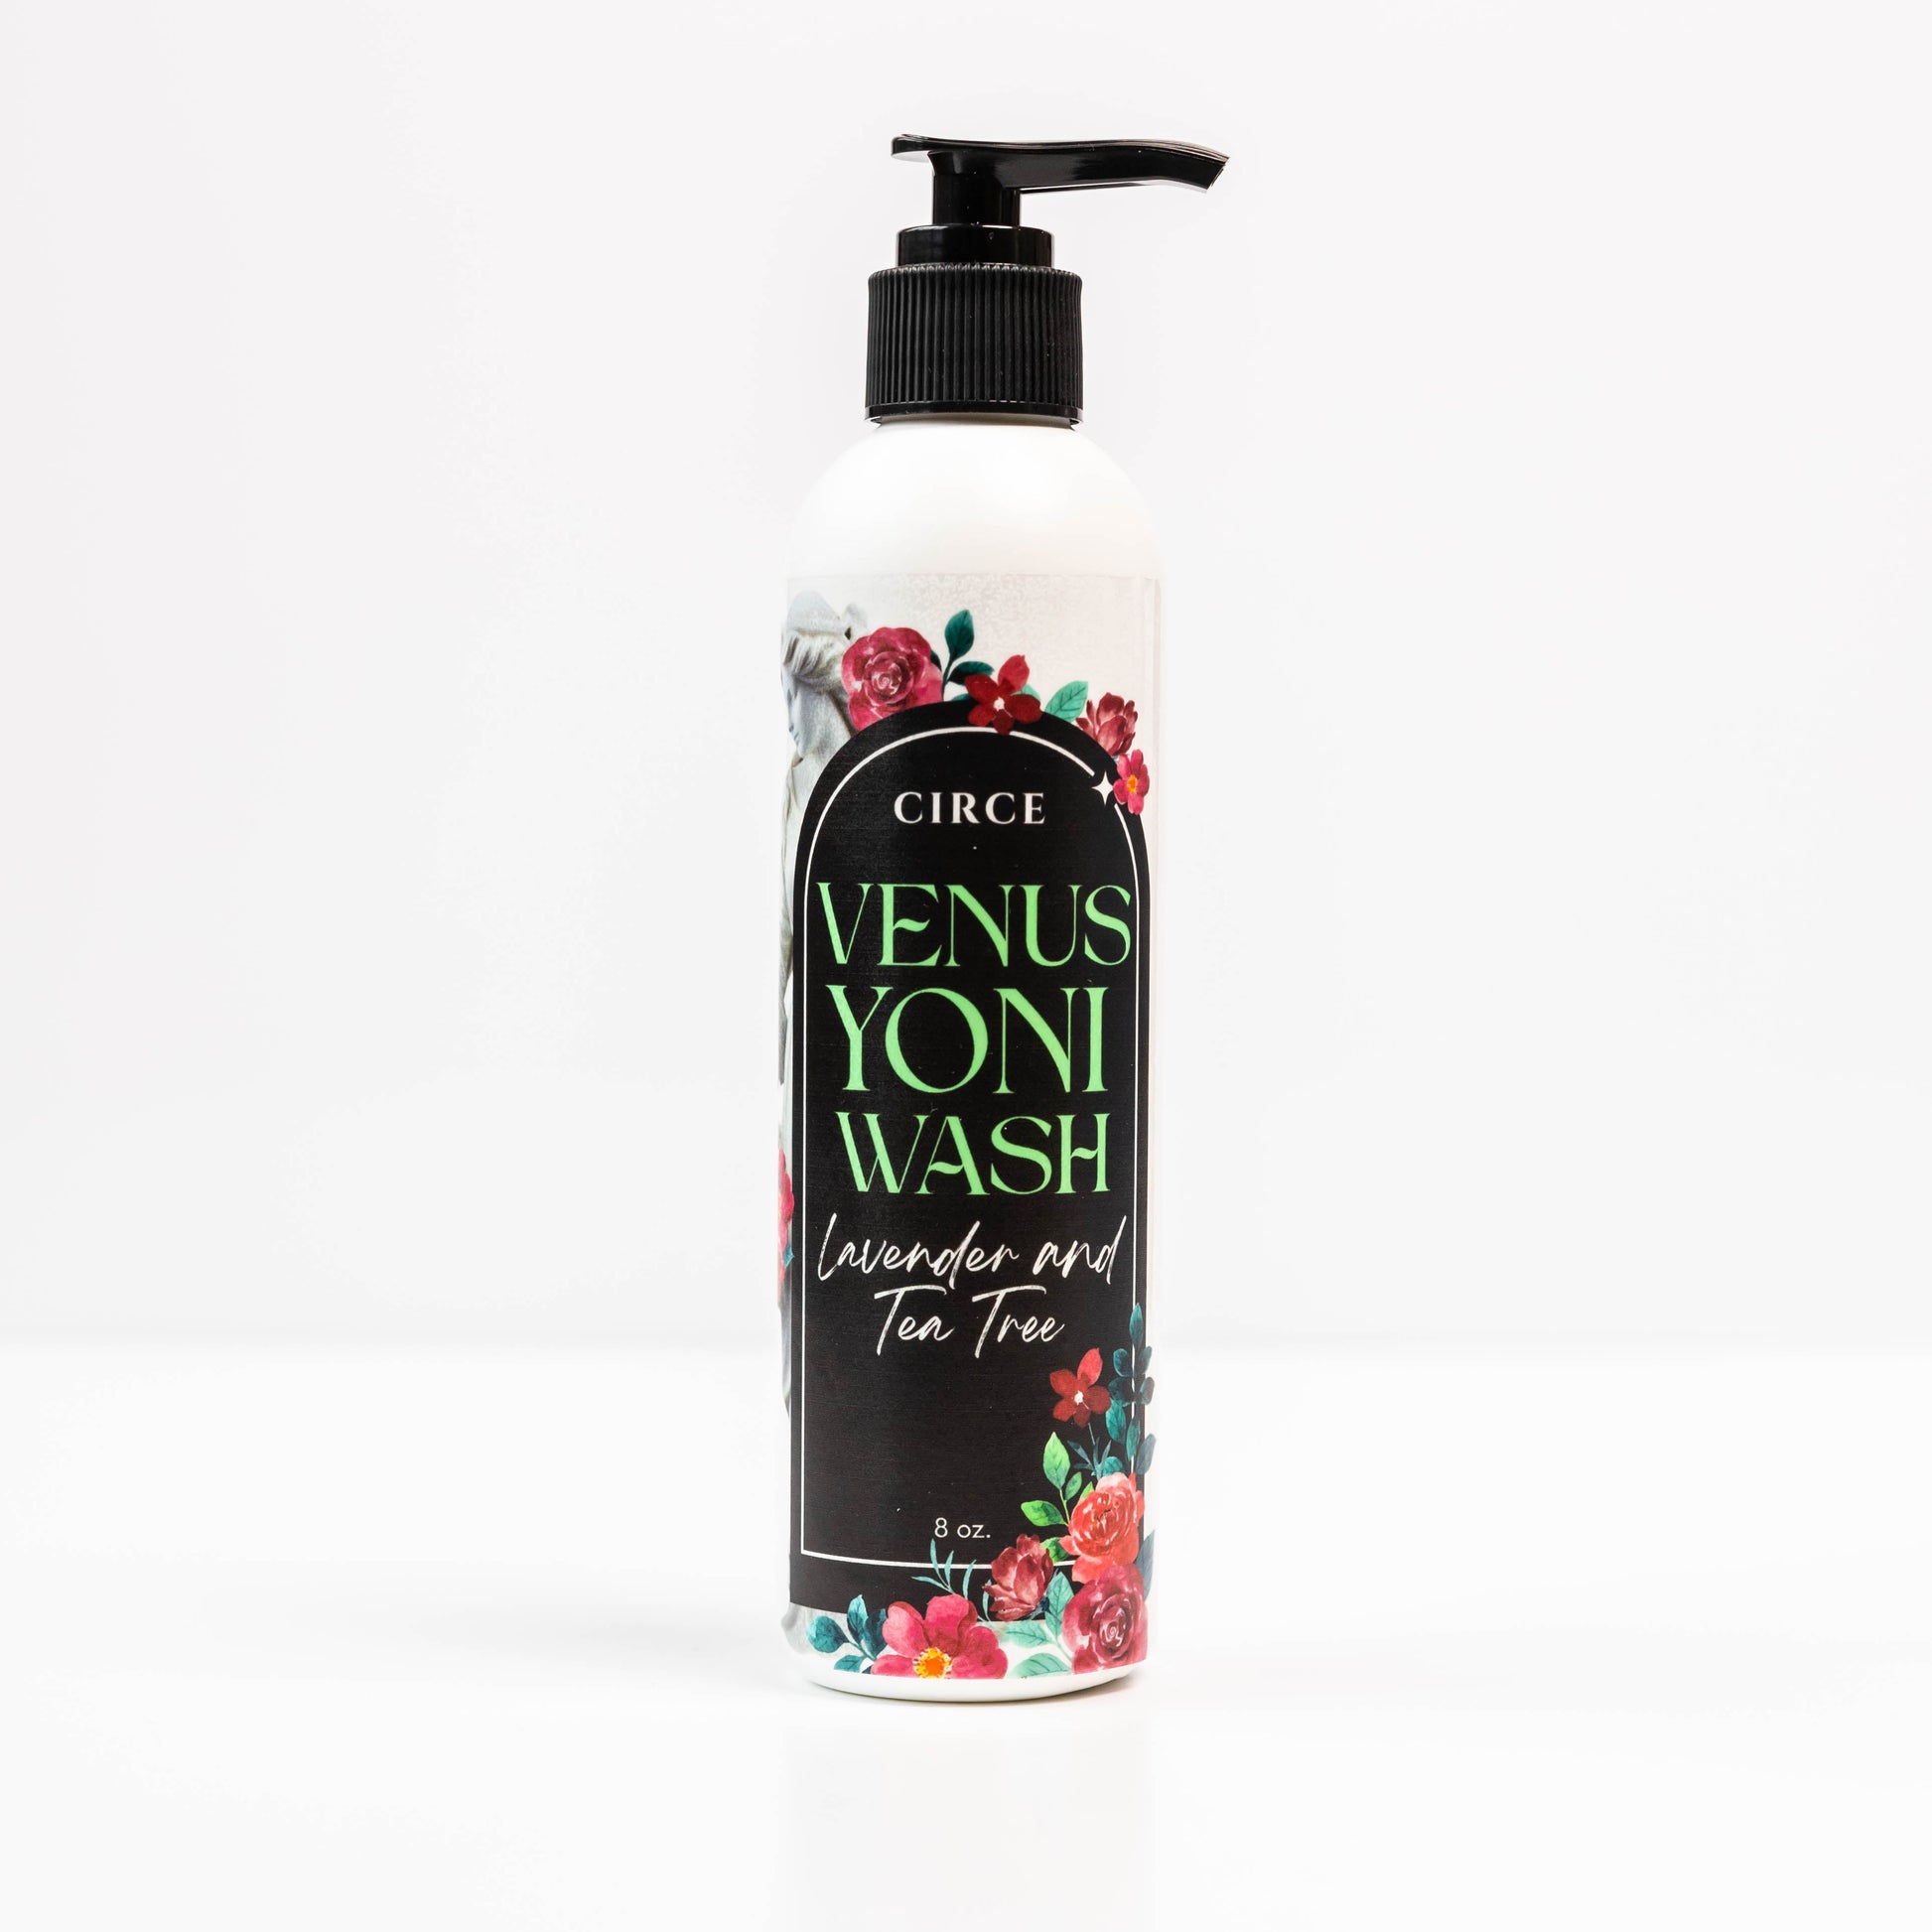 Venus Yoni Wash  from Wholesale Natural Body Care